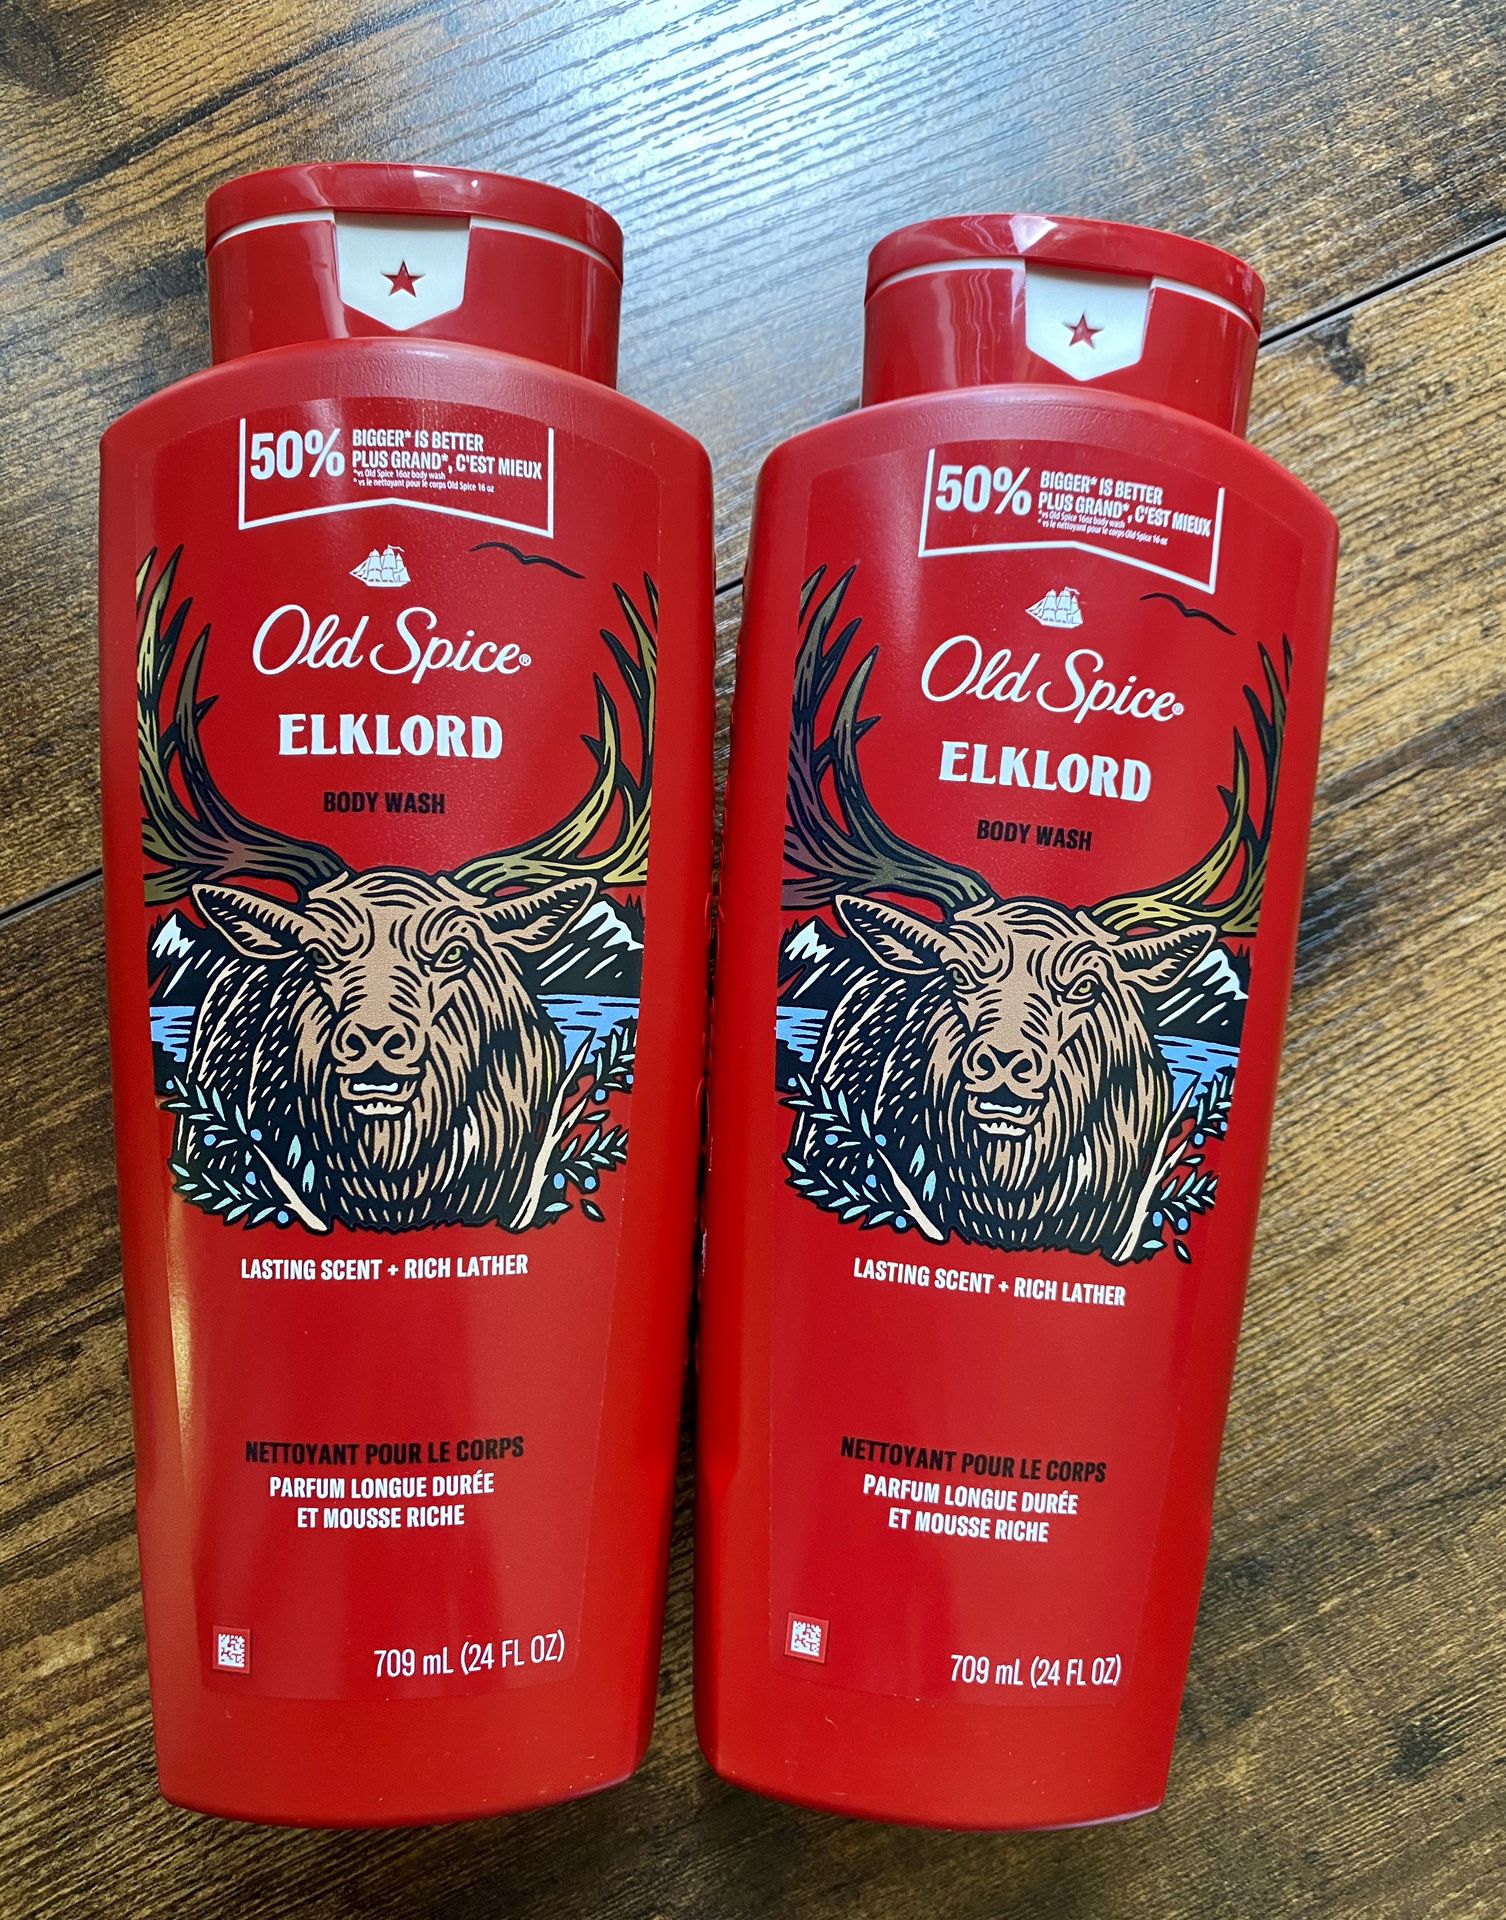 Old Spice! Elklord!!!